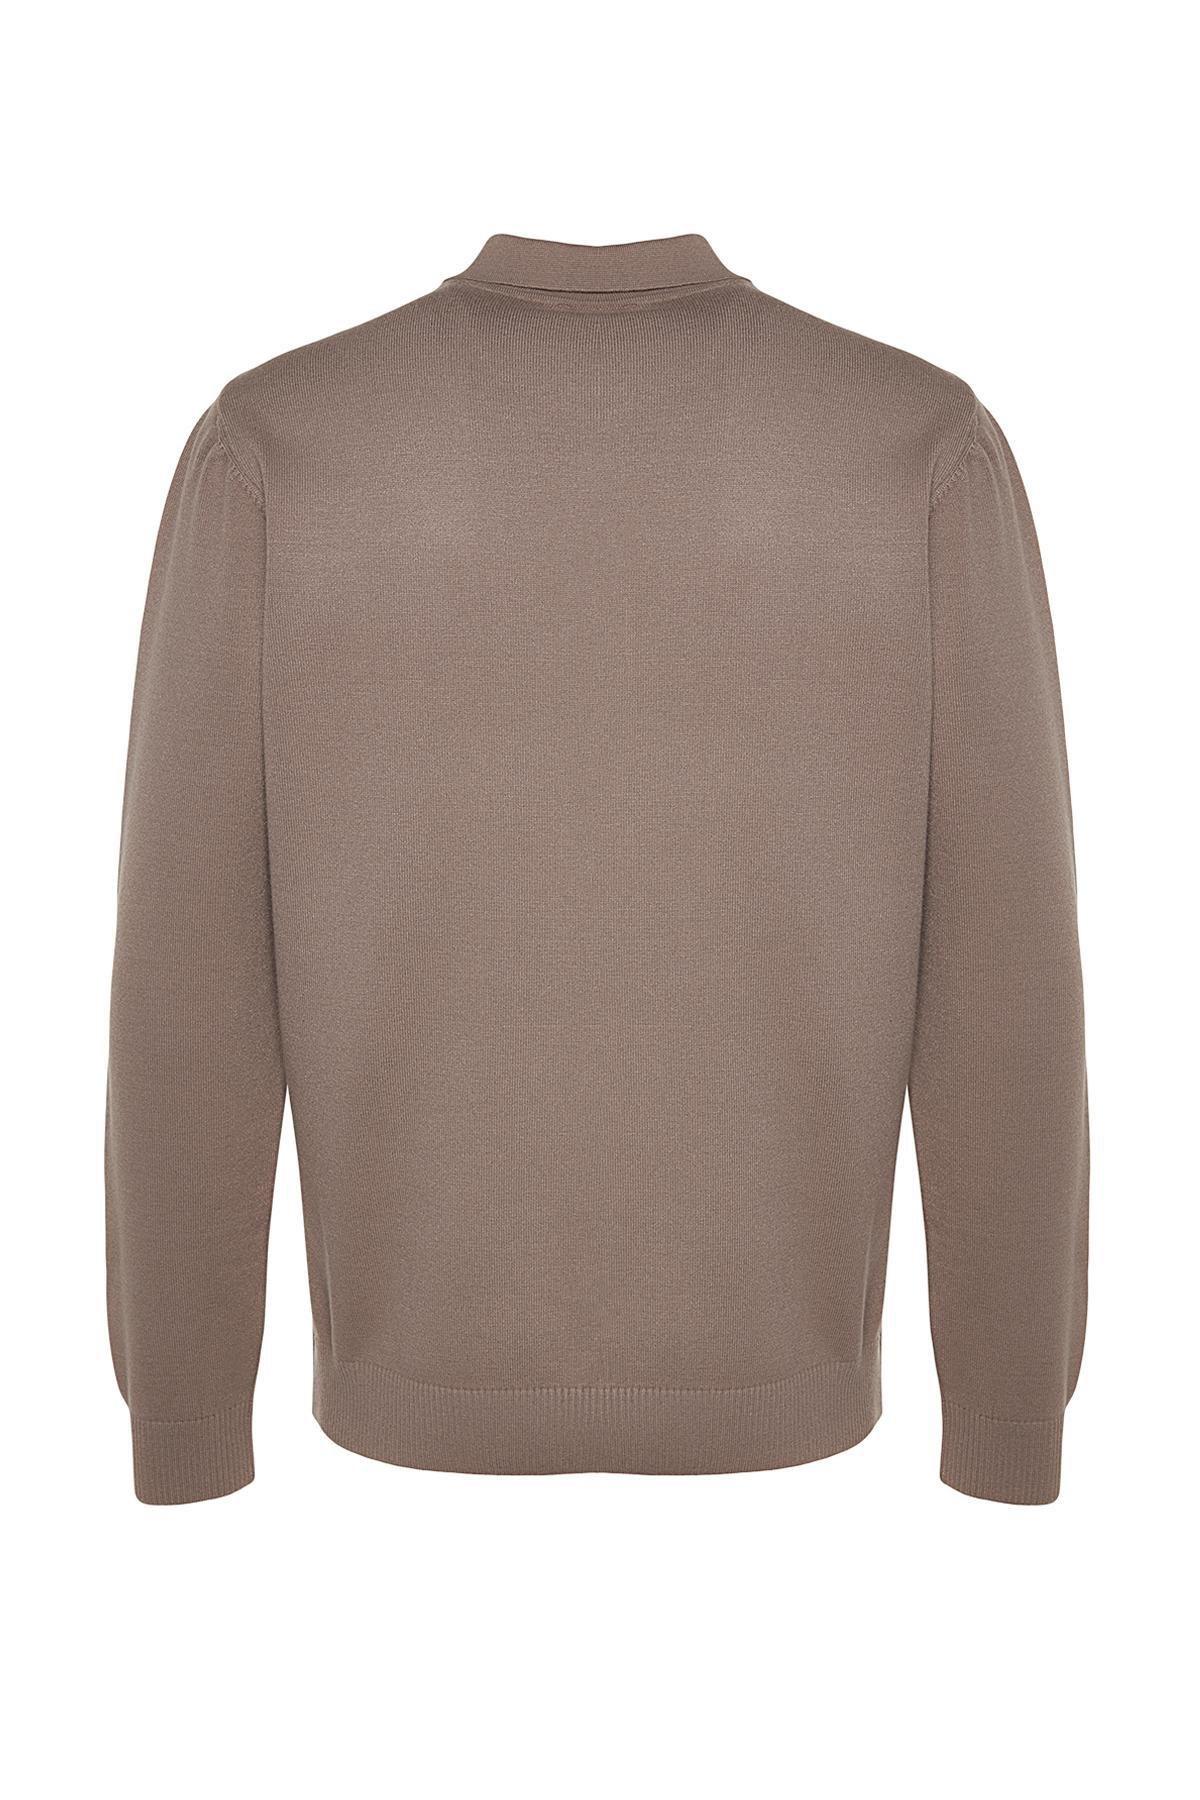 Trendyol - Brown Limited Edition Basic Knitwear Sweater.